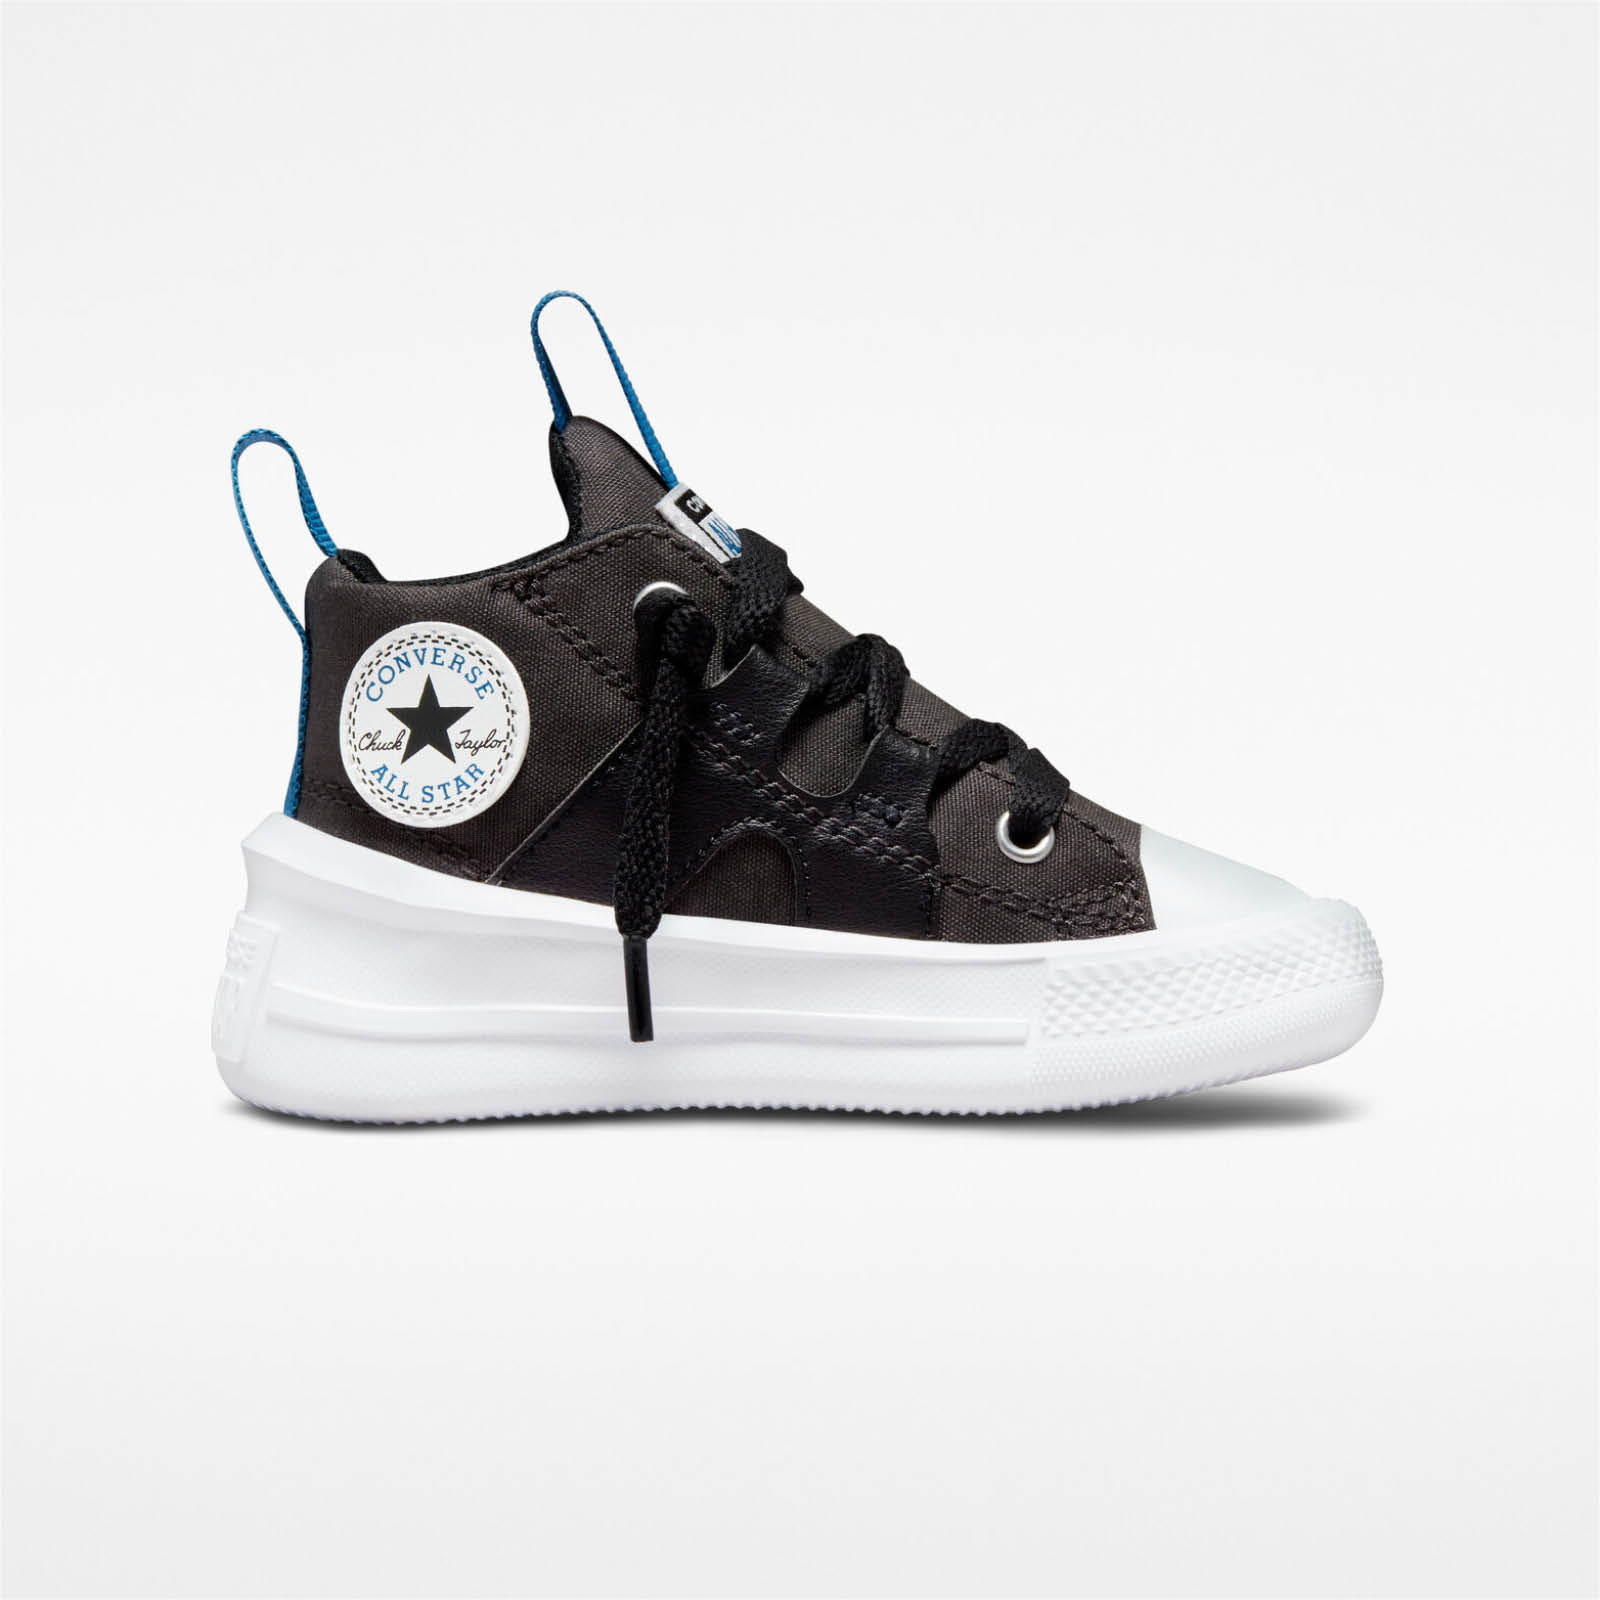 Converse - CHUCK TAYLOR ALL STAR ULTRA COLOR POP - 021-STORM WIND/BLACK Παιδικά > Παπούτσια > Sneaker > Παπούτσι Mid Cut